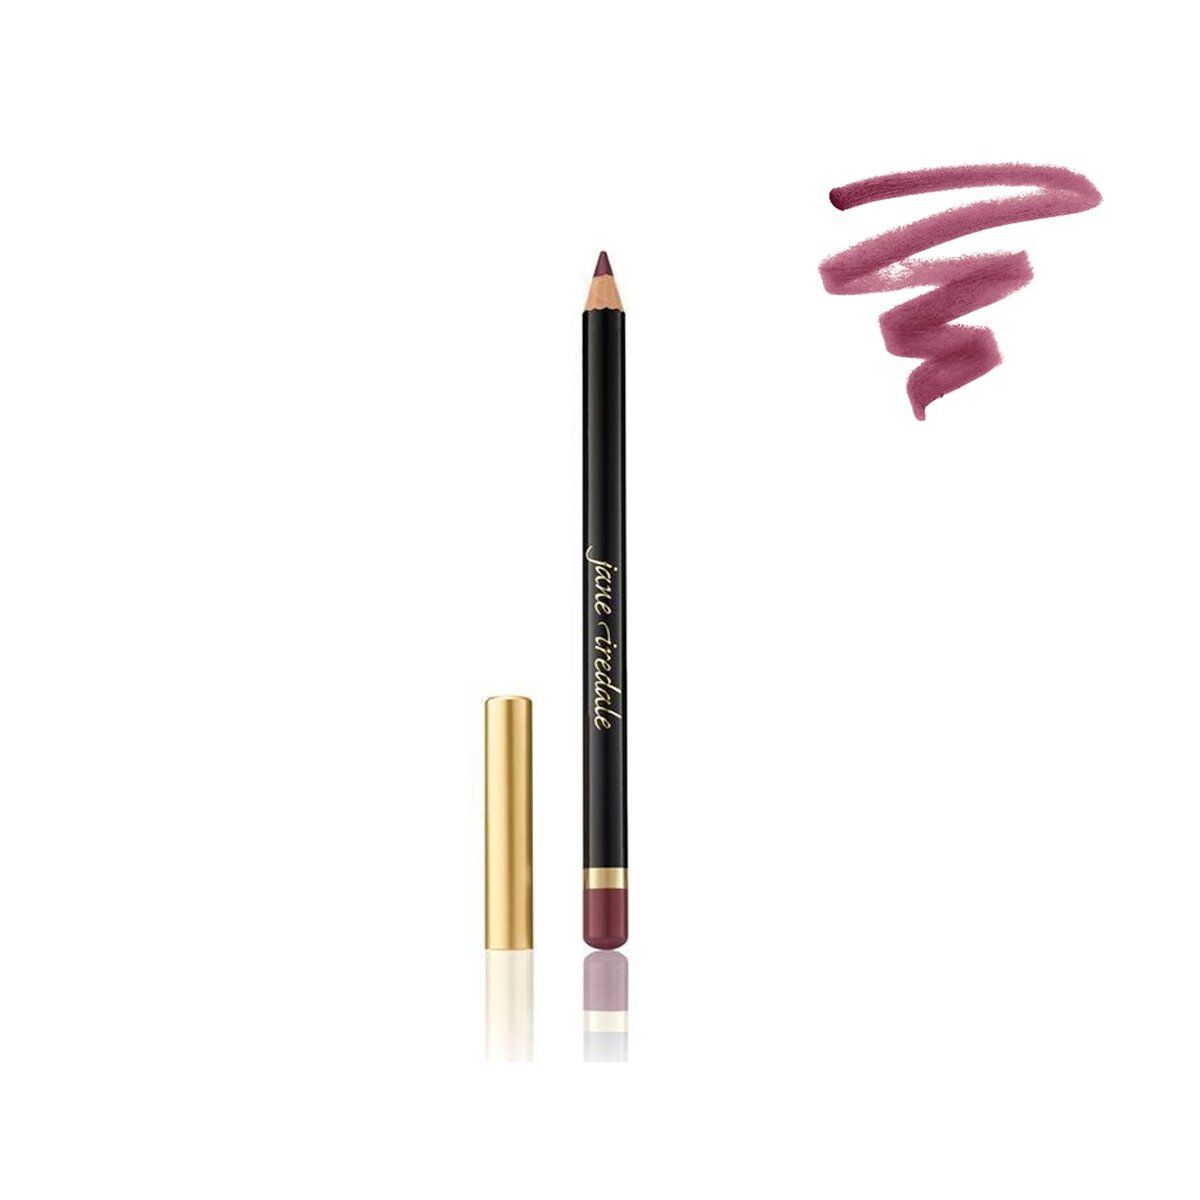 jane iredale - Lip Definers Spice - CLEARANCE